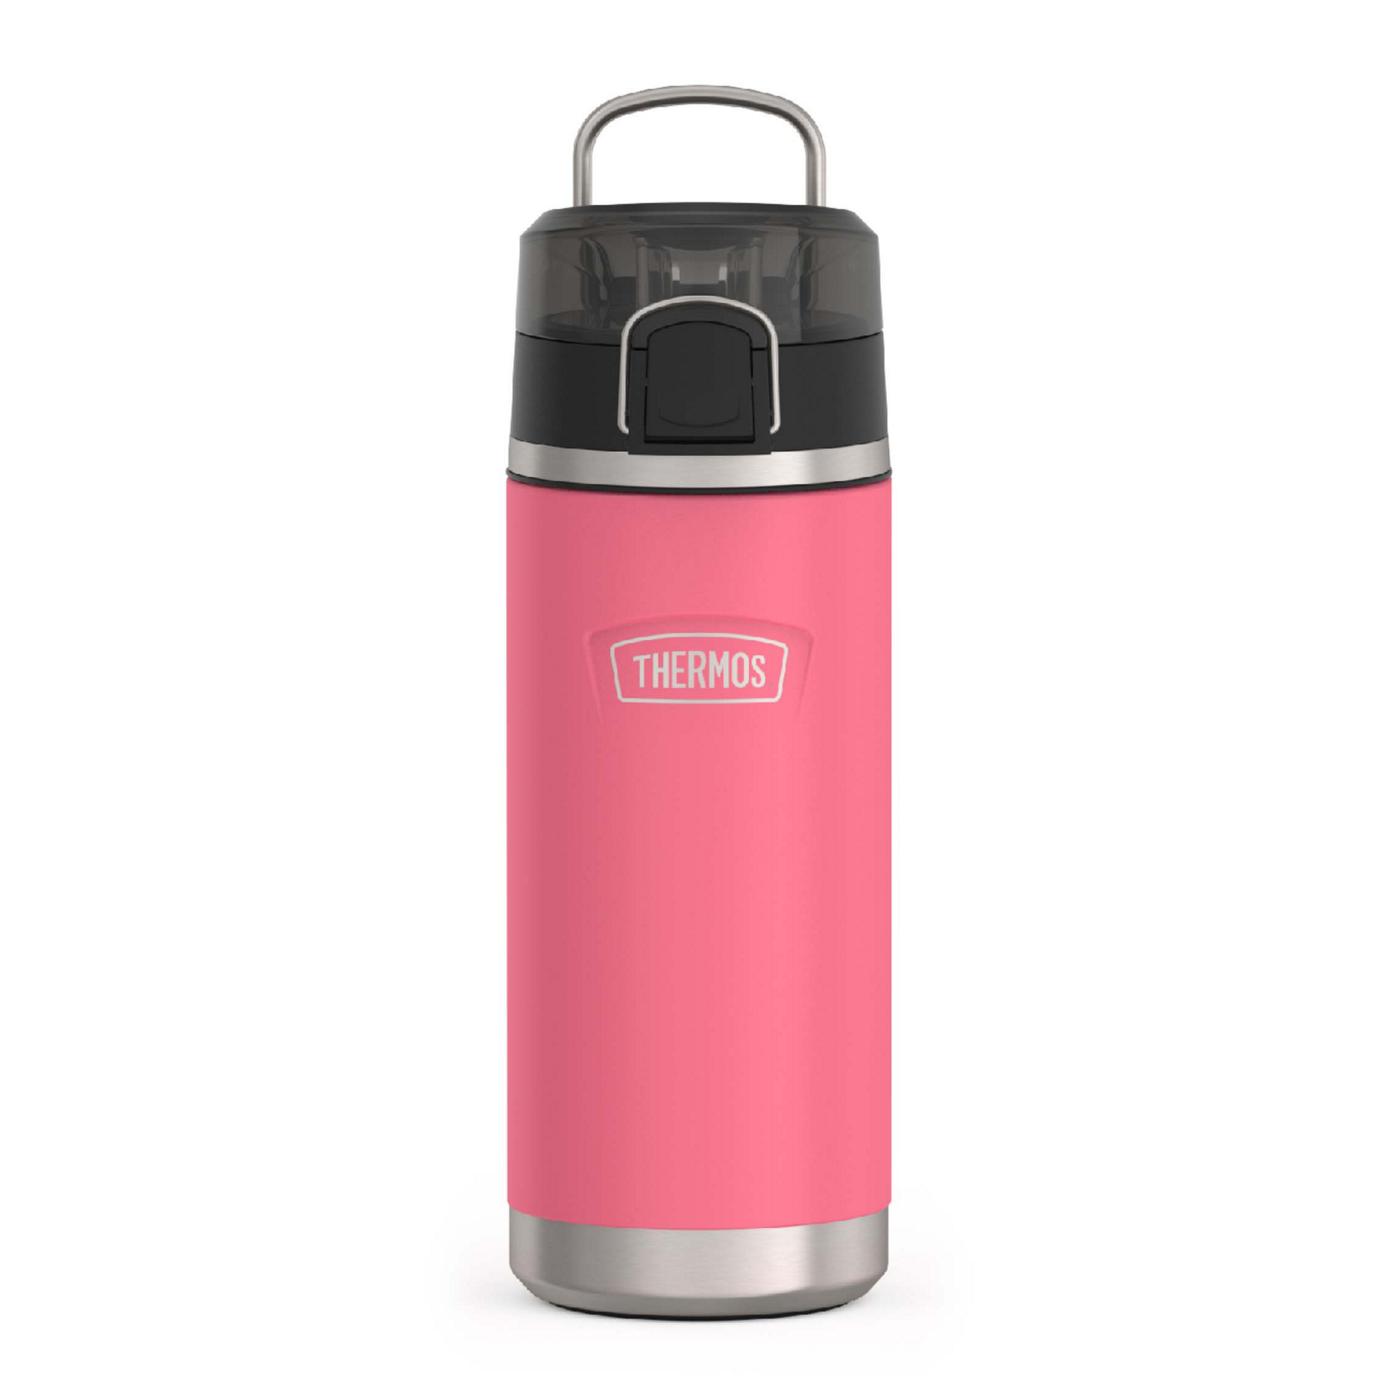 Thermos Icon Kids Water Bottle with Spout Lid - Pink; image 1 of 3